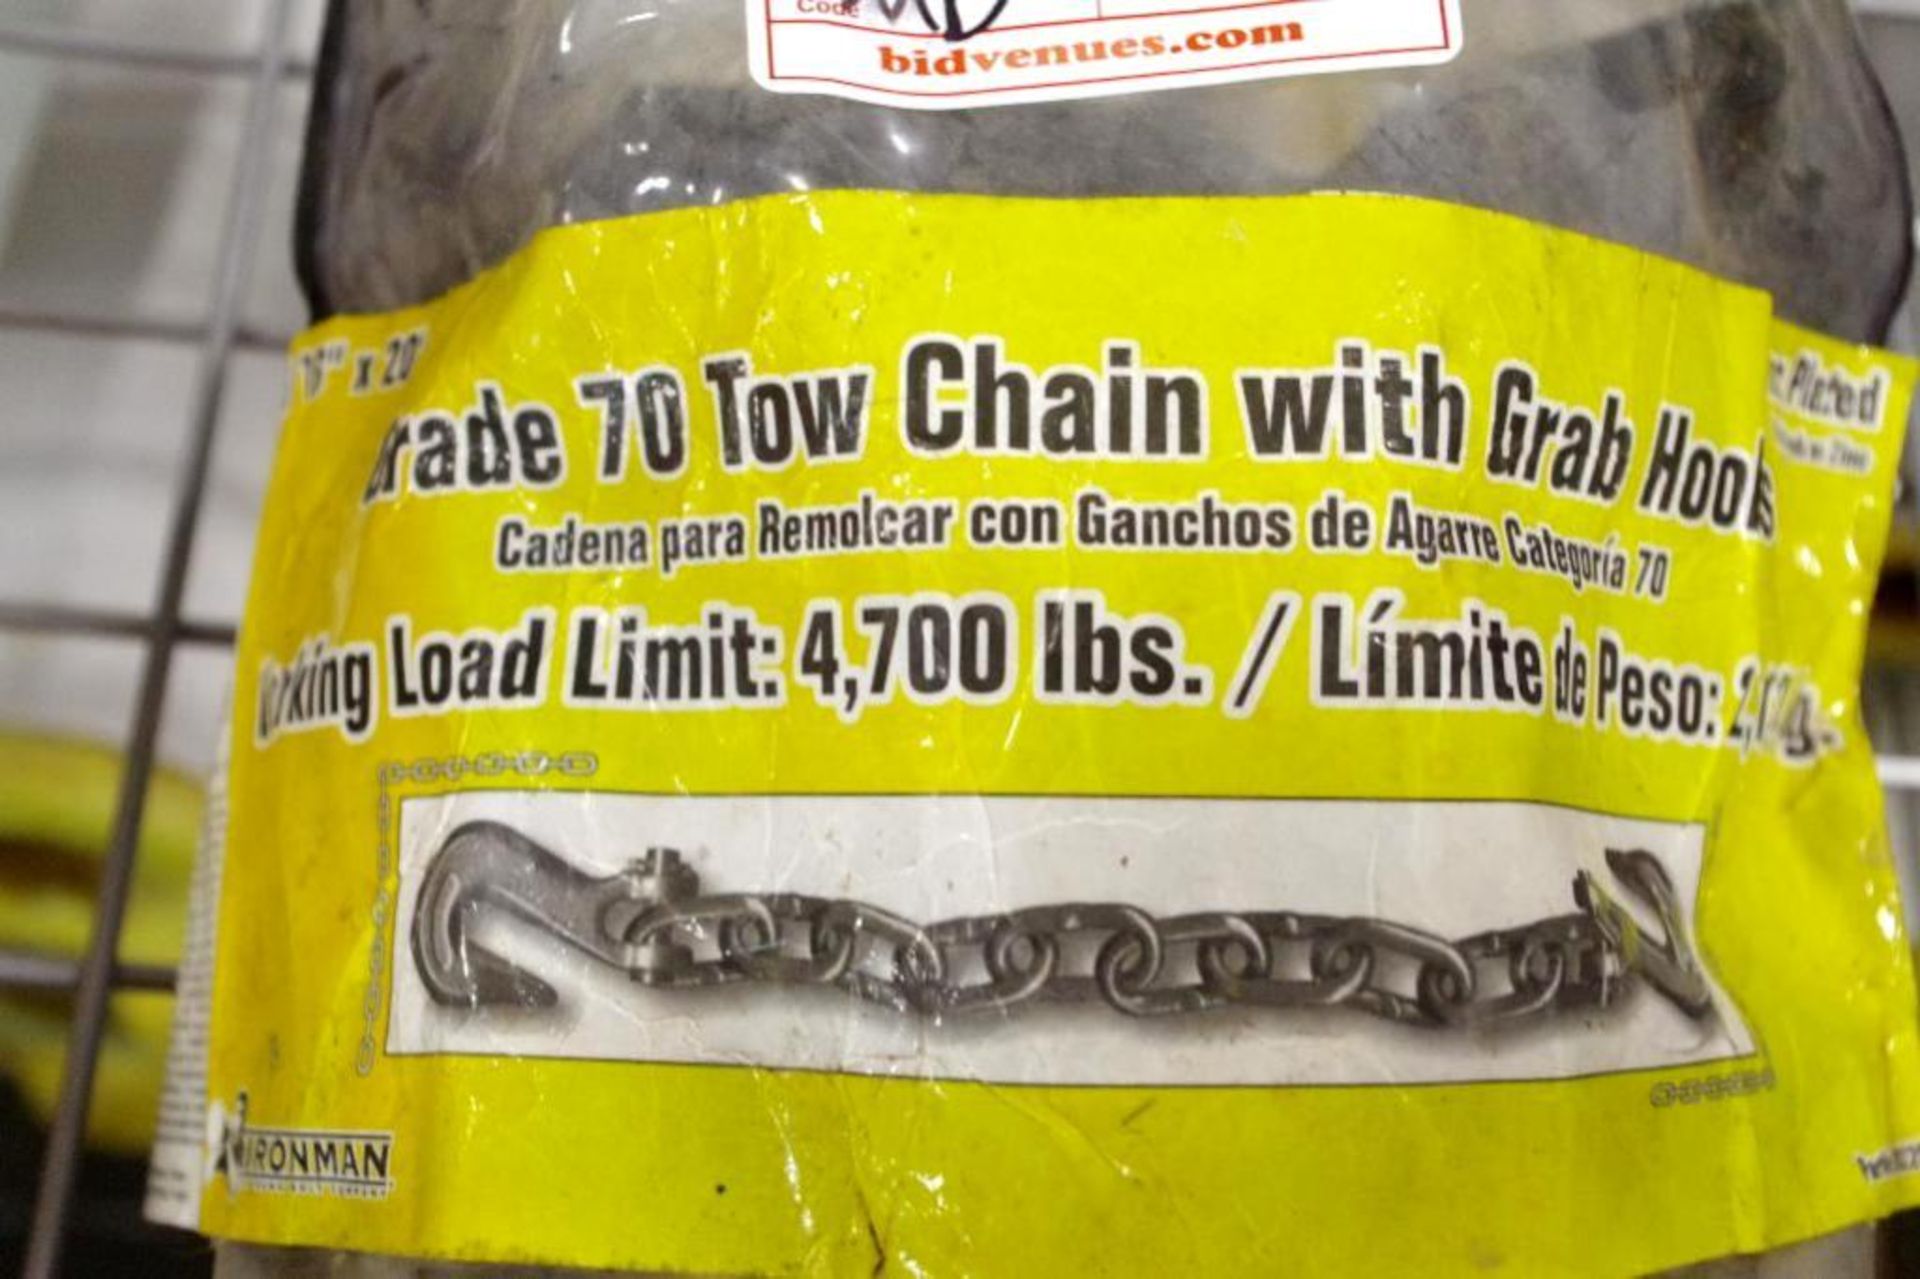 NEW 5/16" x 20' Grade 70 Tow Chain w/ Grab Hooks - Image 2 of 2